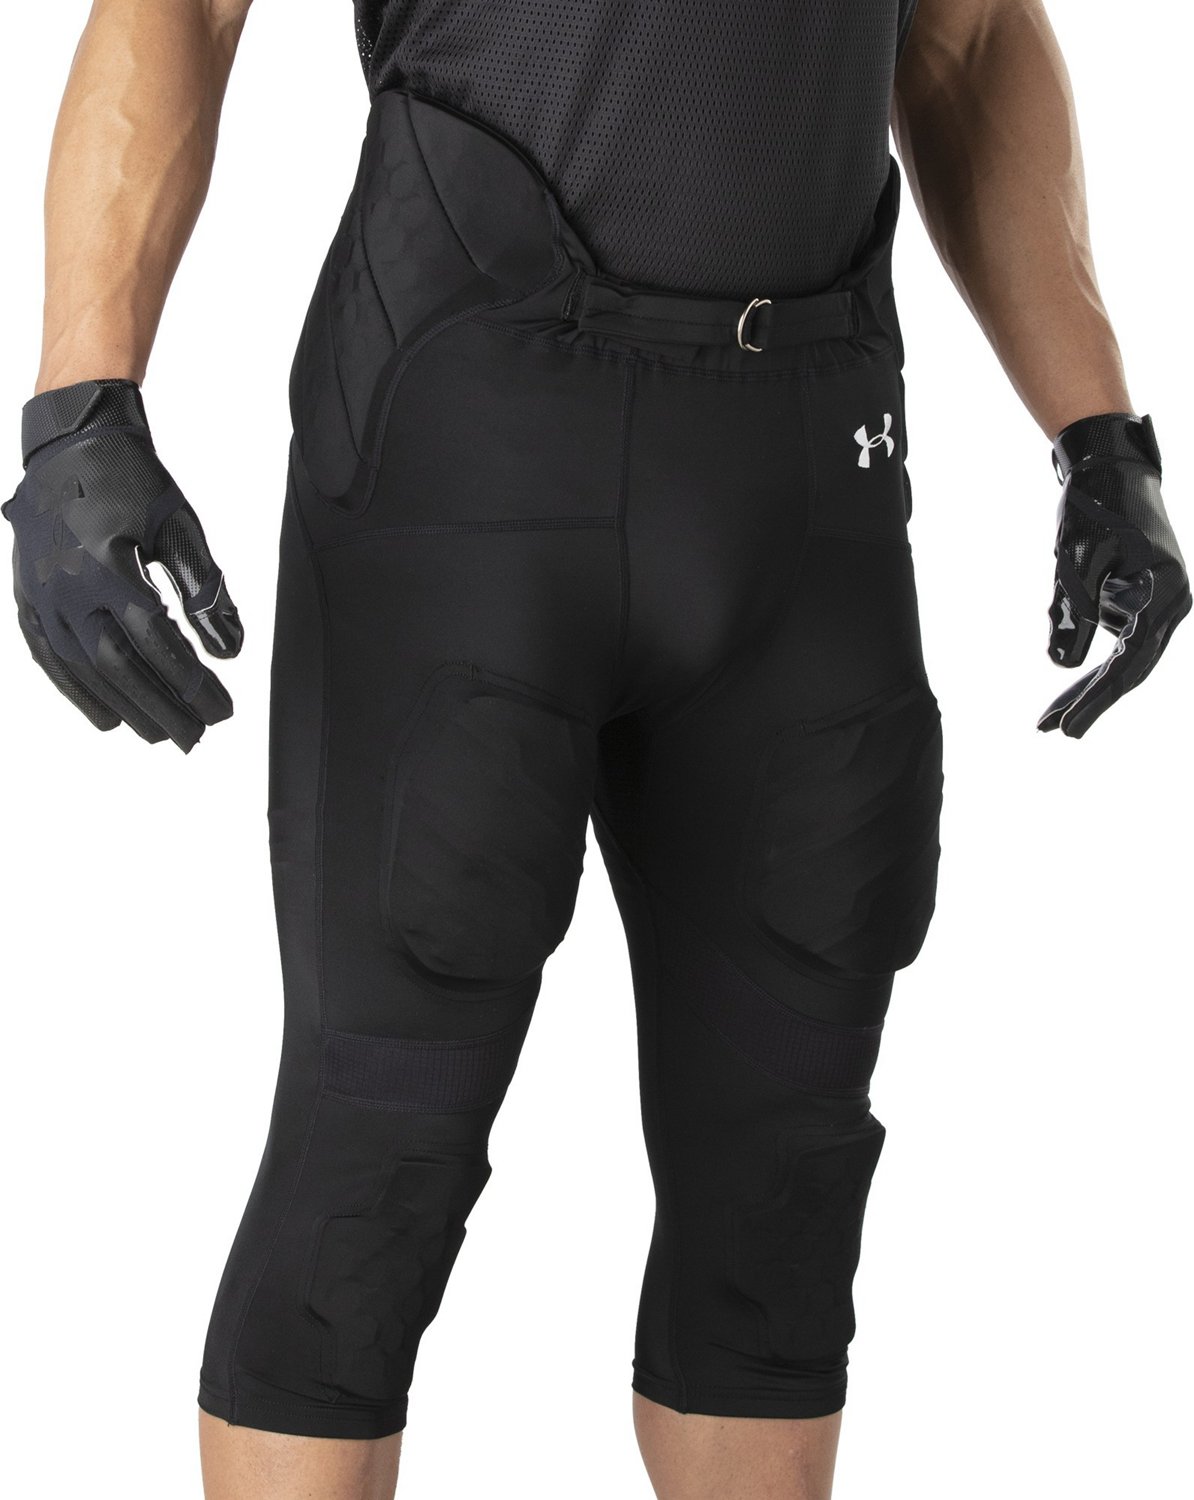 Under Armour Youth Power I Football Pant 